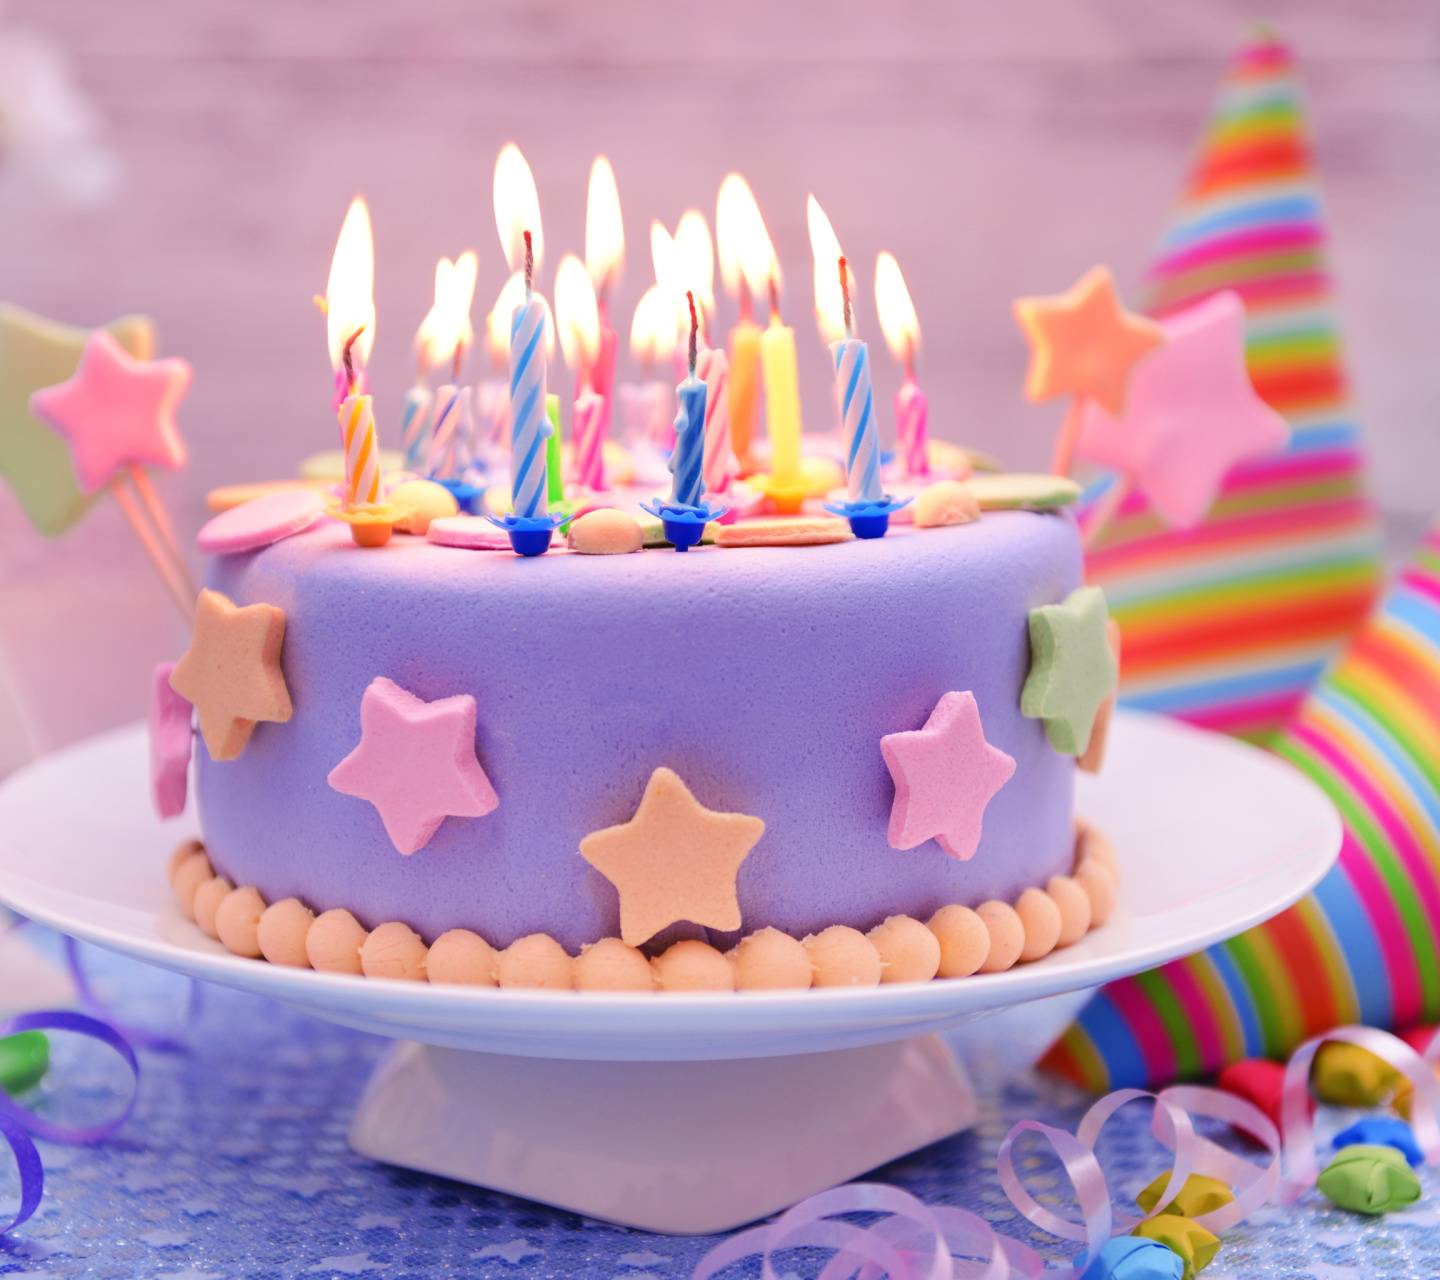 Discover more than 67 birthday cake wallpaper hd best - awesomeenglish ...